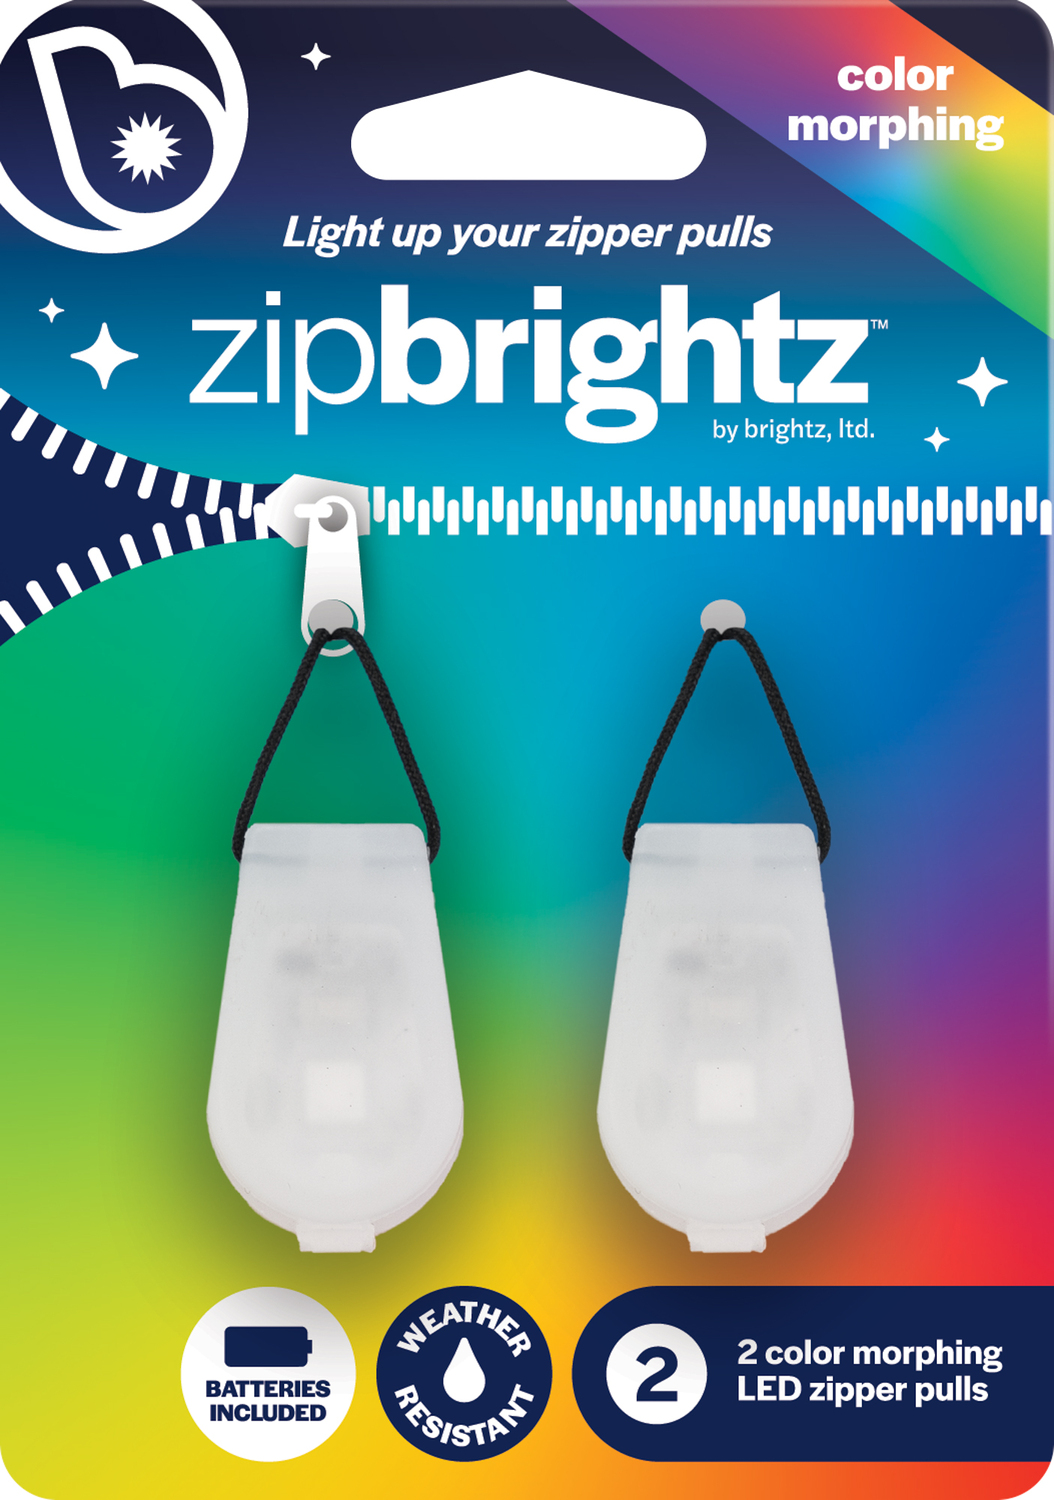 Zipbrightz LED Color Changing Zipper Charms, 2pk from Brightz